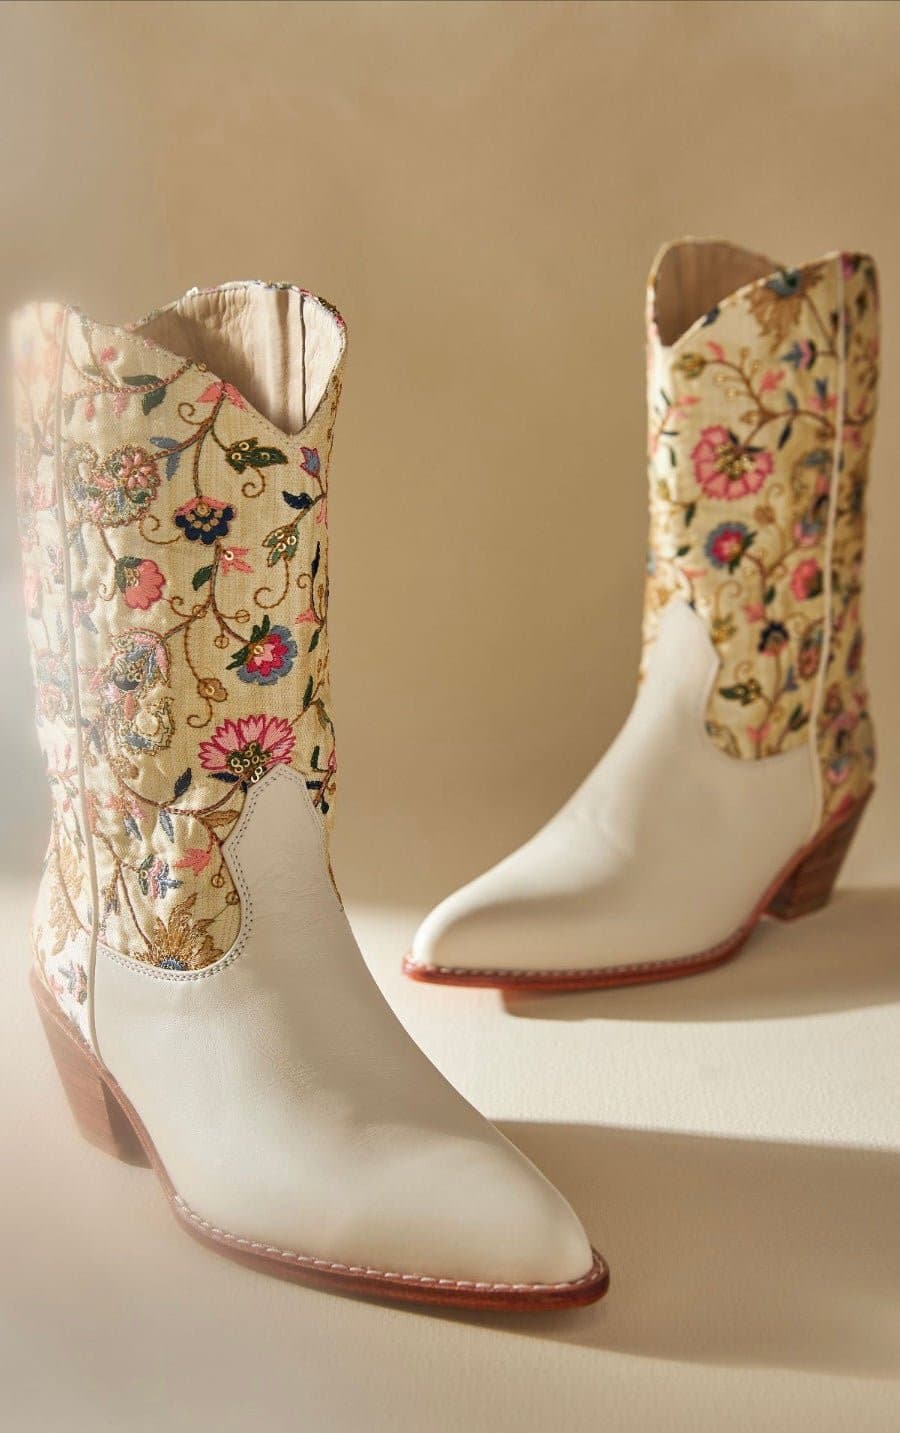 EMBROIDERED WESTERN BOOTS X BHLDN ANTHROPOLOGIE - MOMO STUDIO BERLIN - Berlin Concept Store - sustainable & ethical fashion